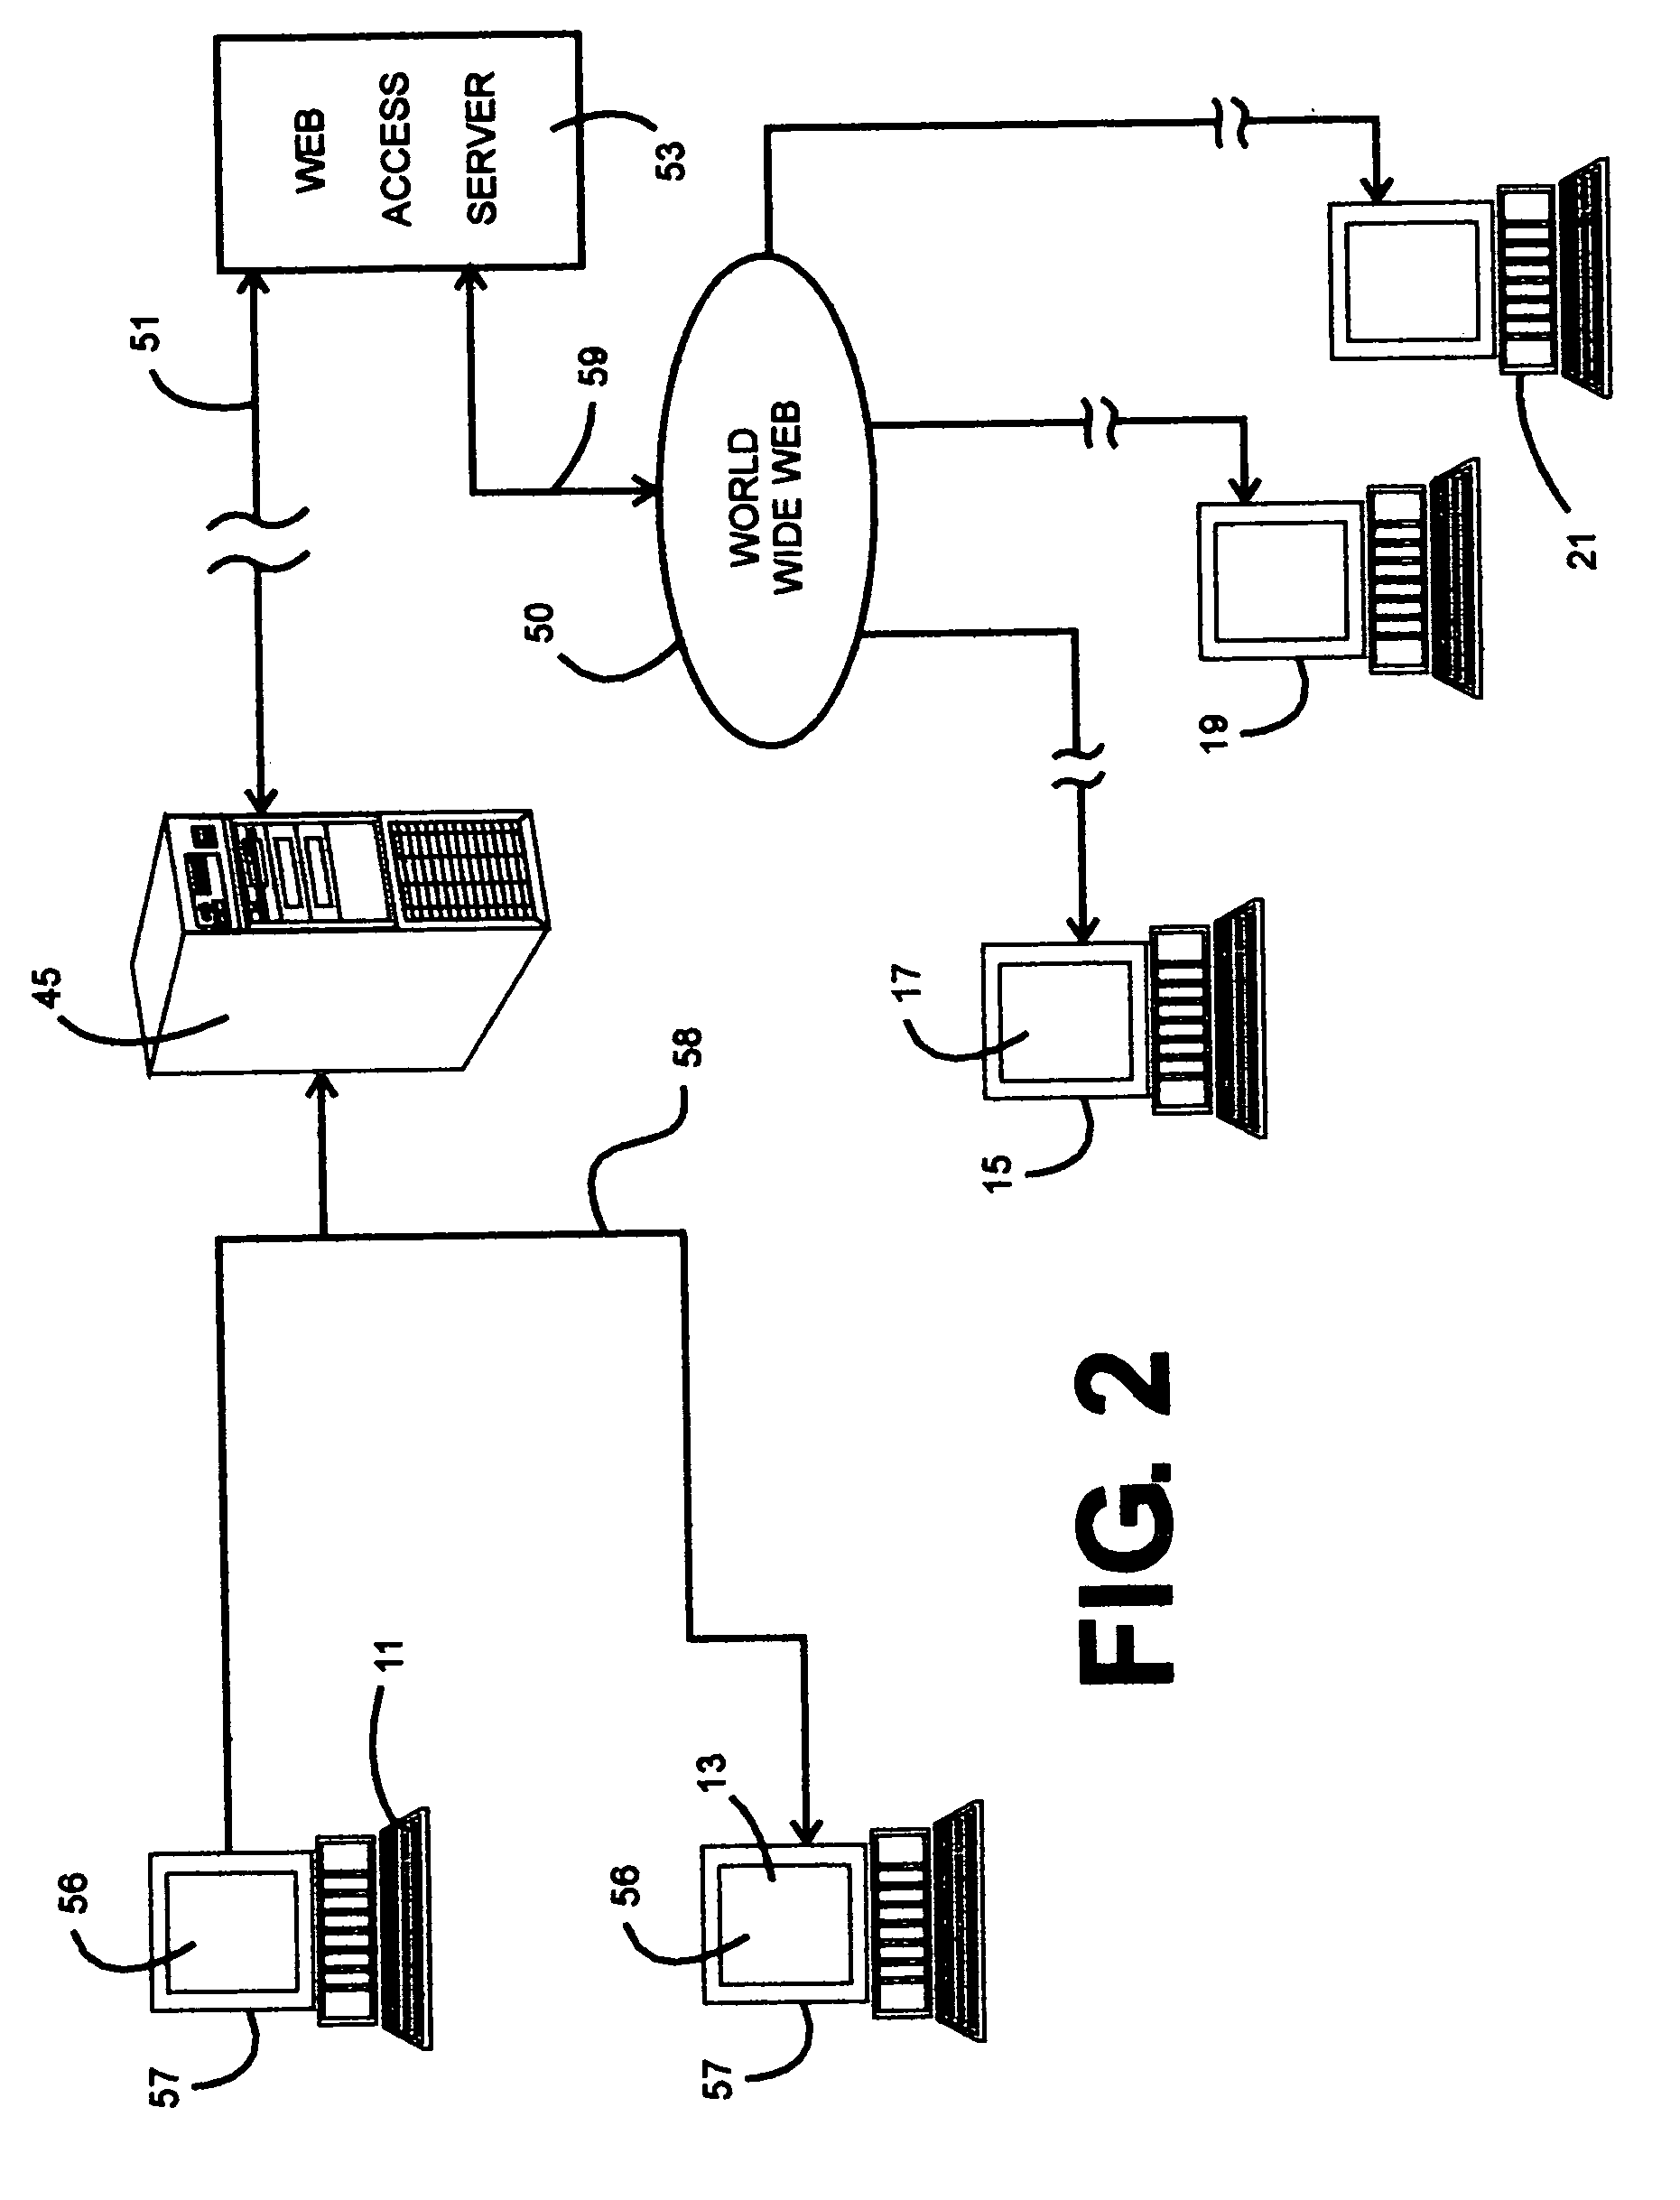 Electronic mail distribution via a network of computer controlled display terminals with interactive display interfaces offering a sender creating an E-mail message proposed recipients based upon E-mail wording